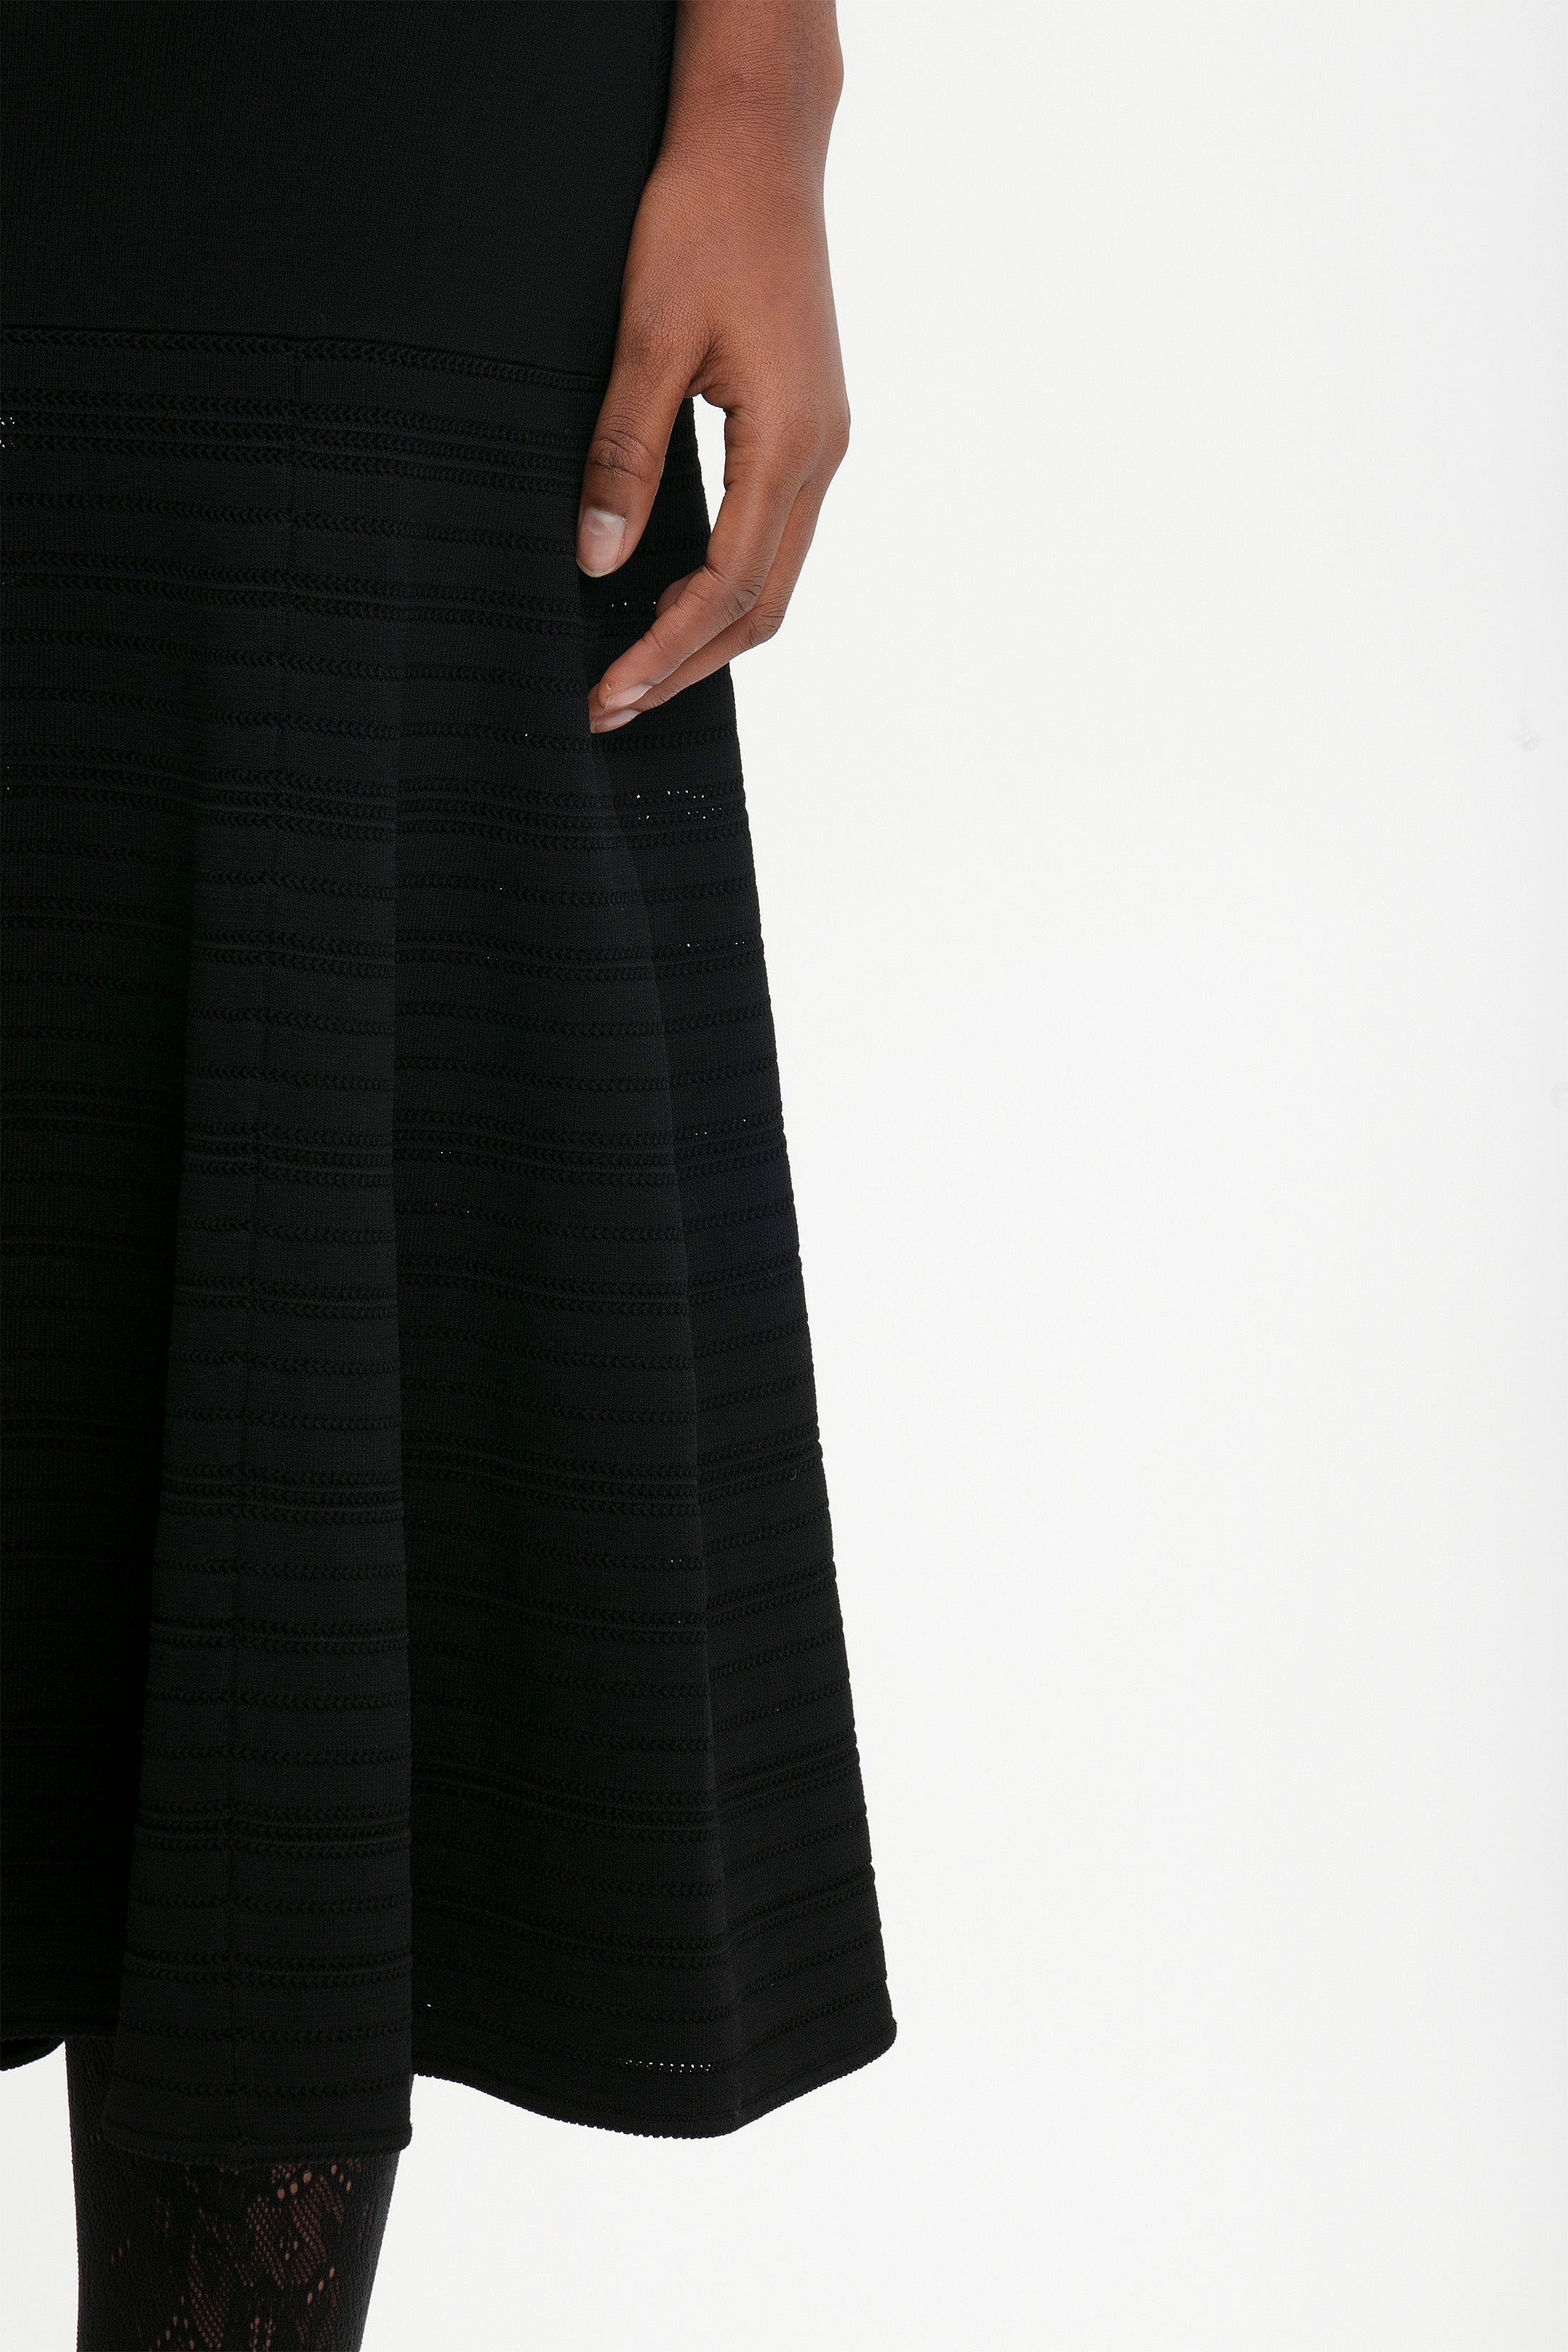 Fit And Flare Midi Skirt In Black - 5